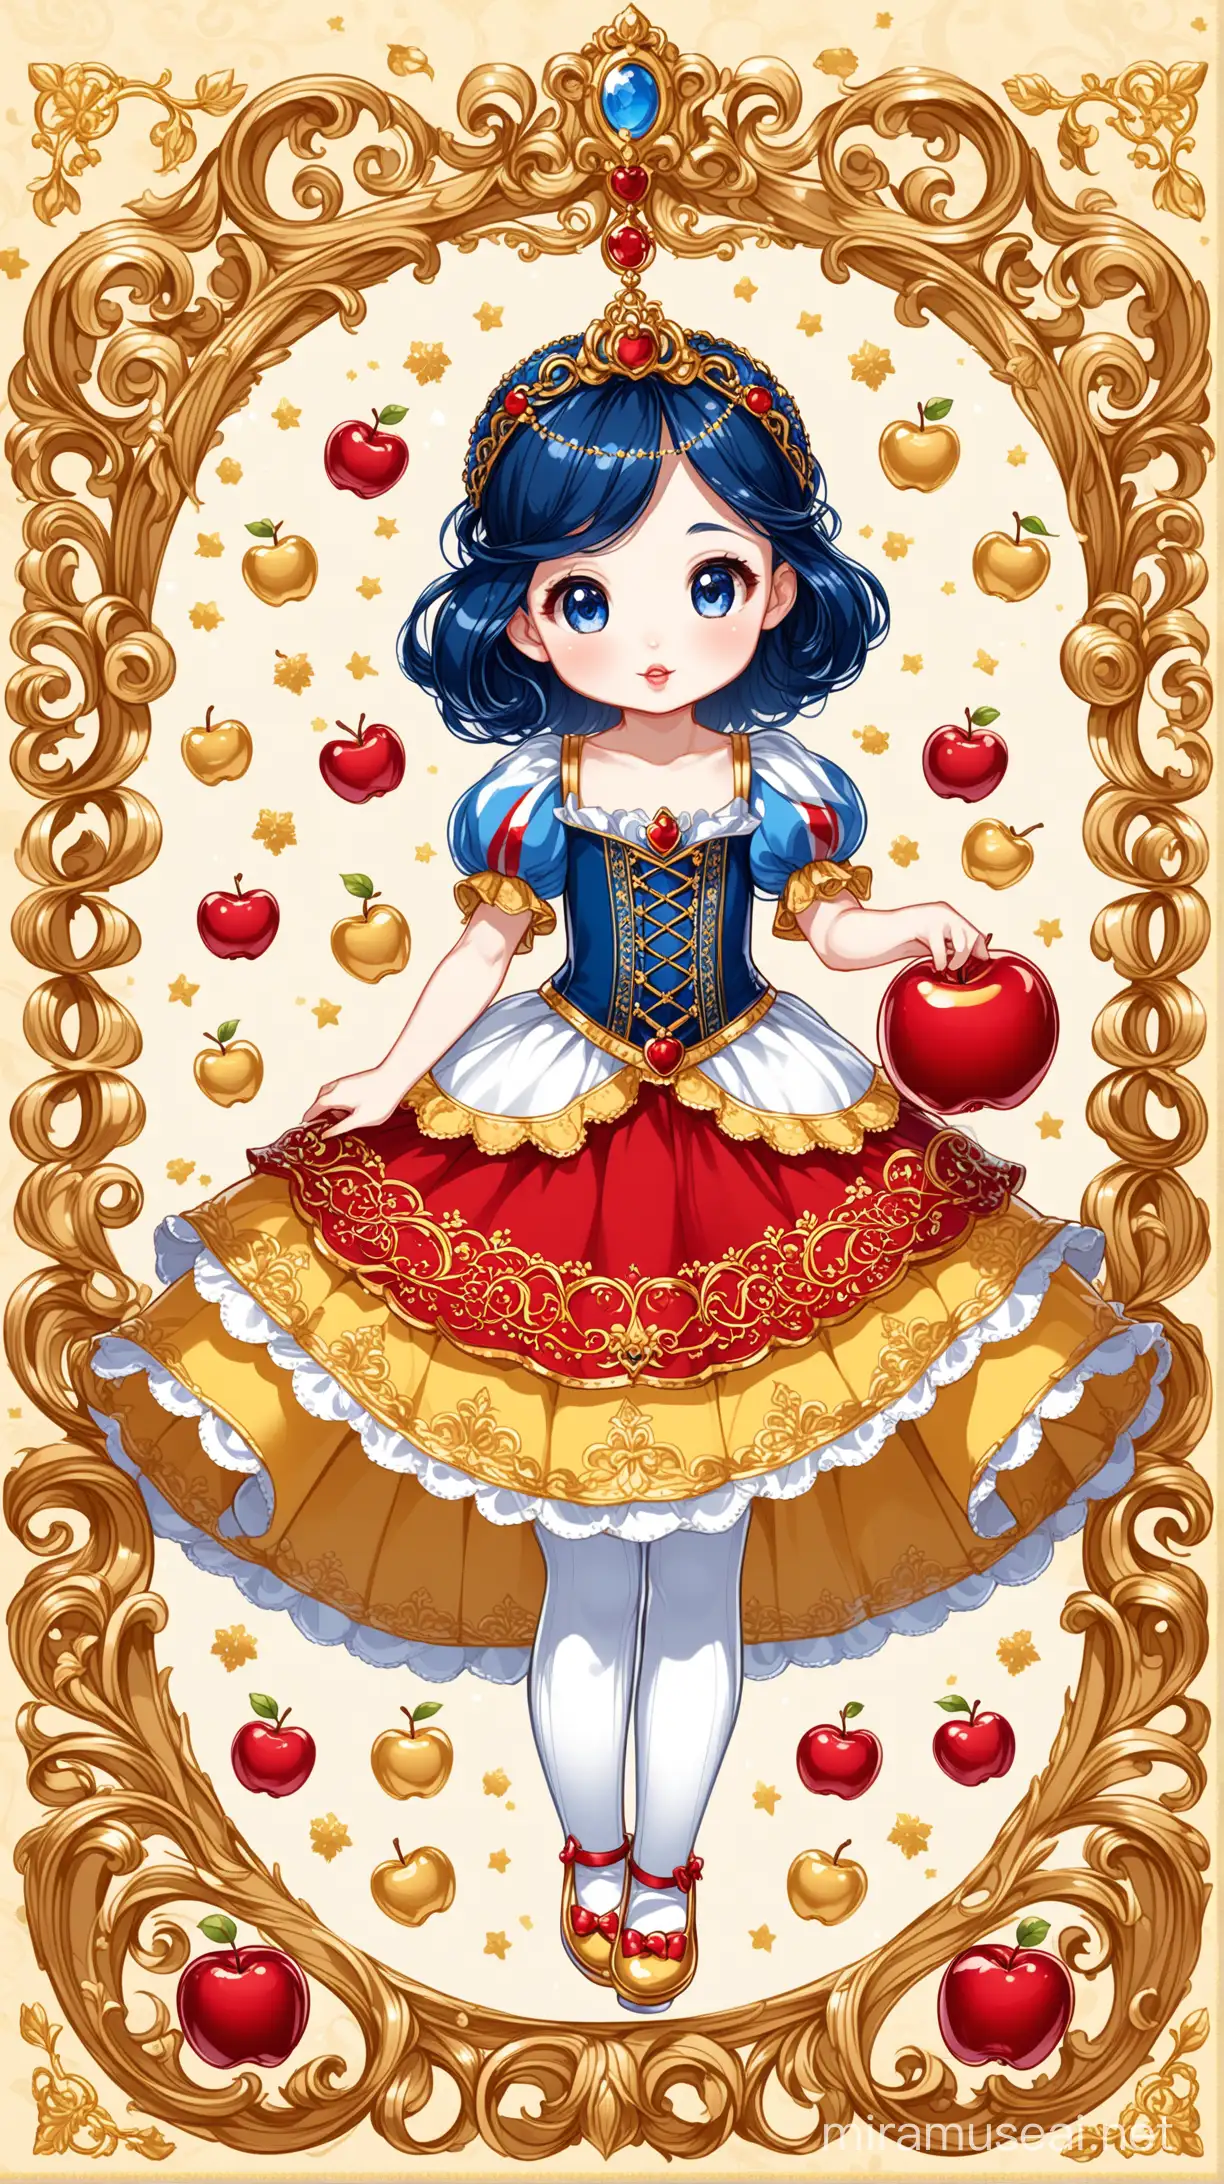 Create an ultra-detailed Baroque-style chibi illustration of a 7-year-old Snow White, inspired by the Disney version. She wears a navy blue corset with puffy sleeves, adorned with blue and red stripes. Her arms are exposed, holding a red apple in one hand while lifting the hem of her yellow skirt with the other. Include intricate Rococo ornamentation throughout the scene.